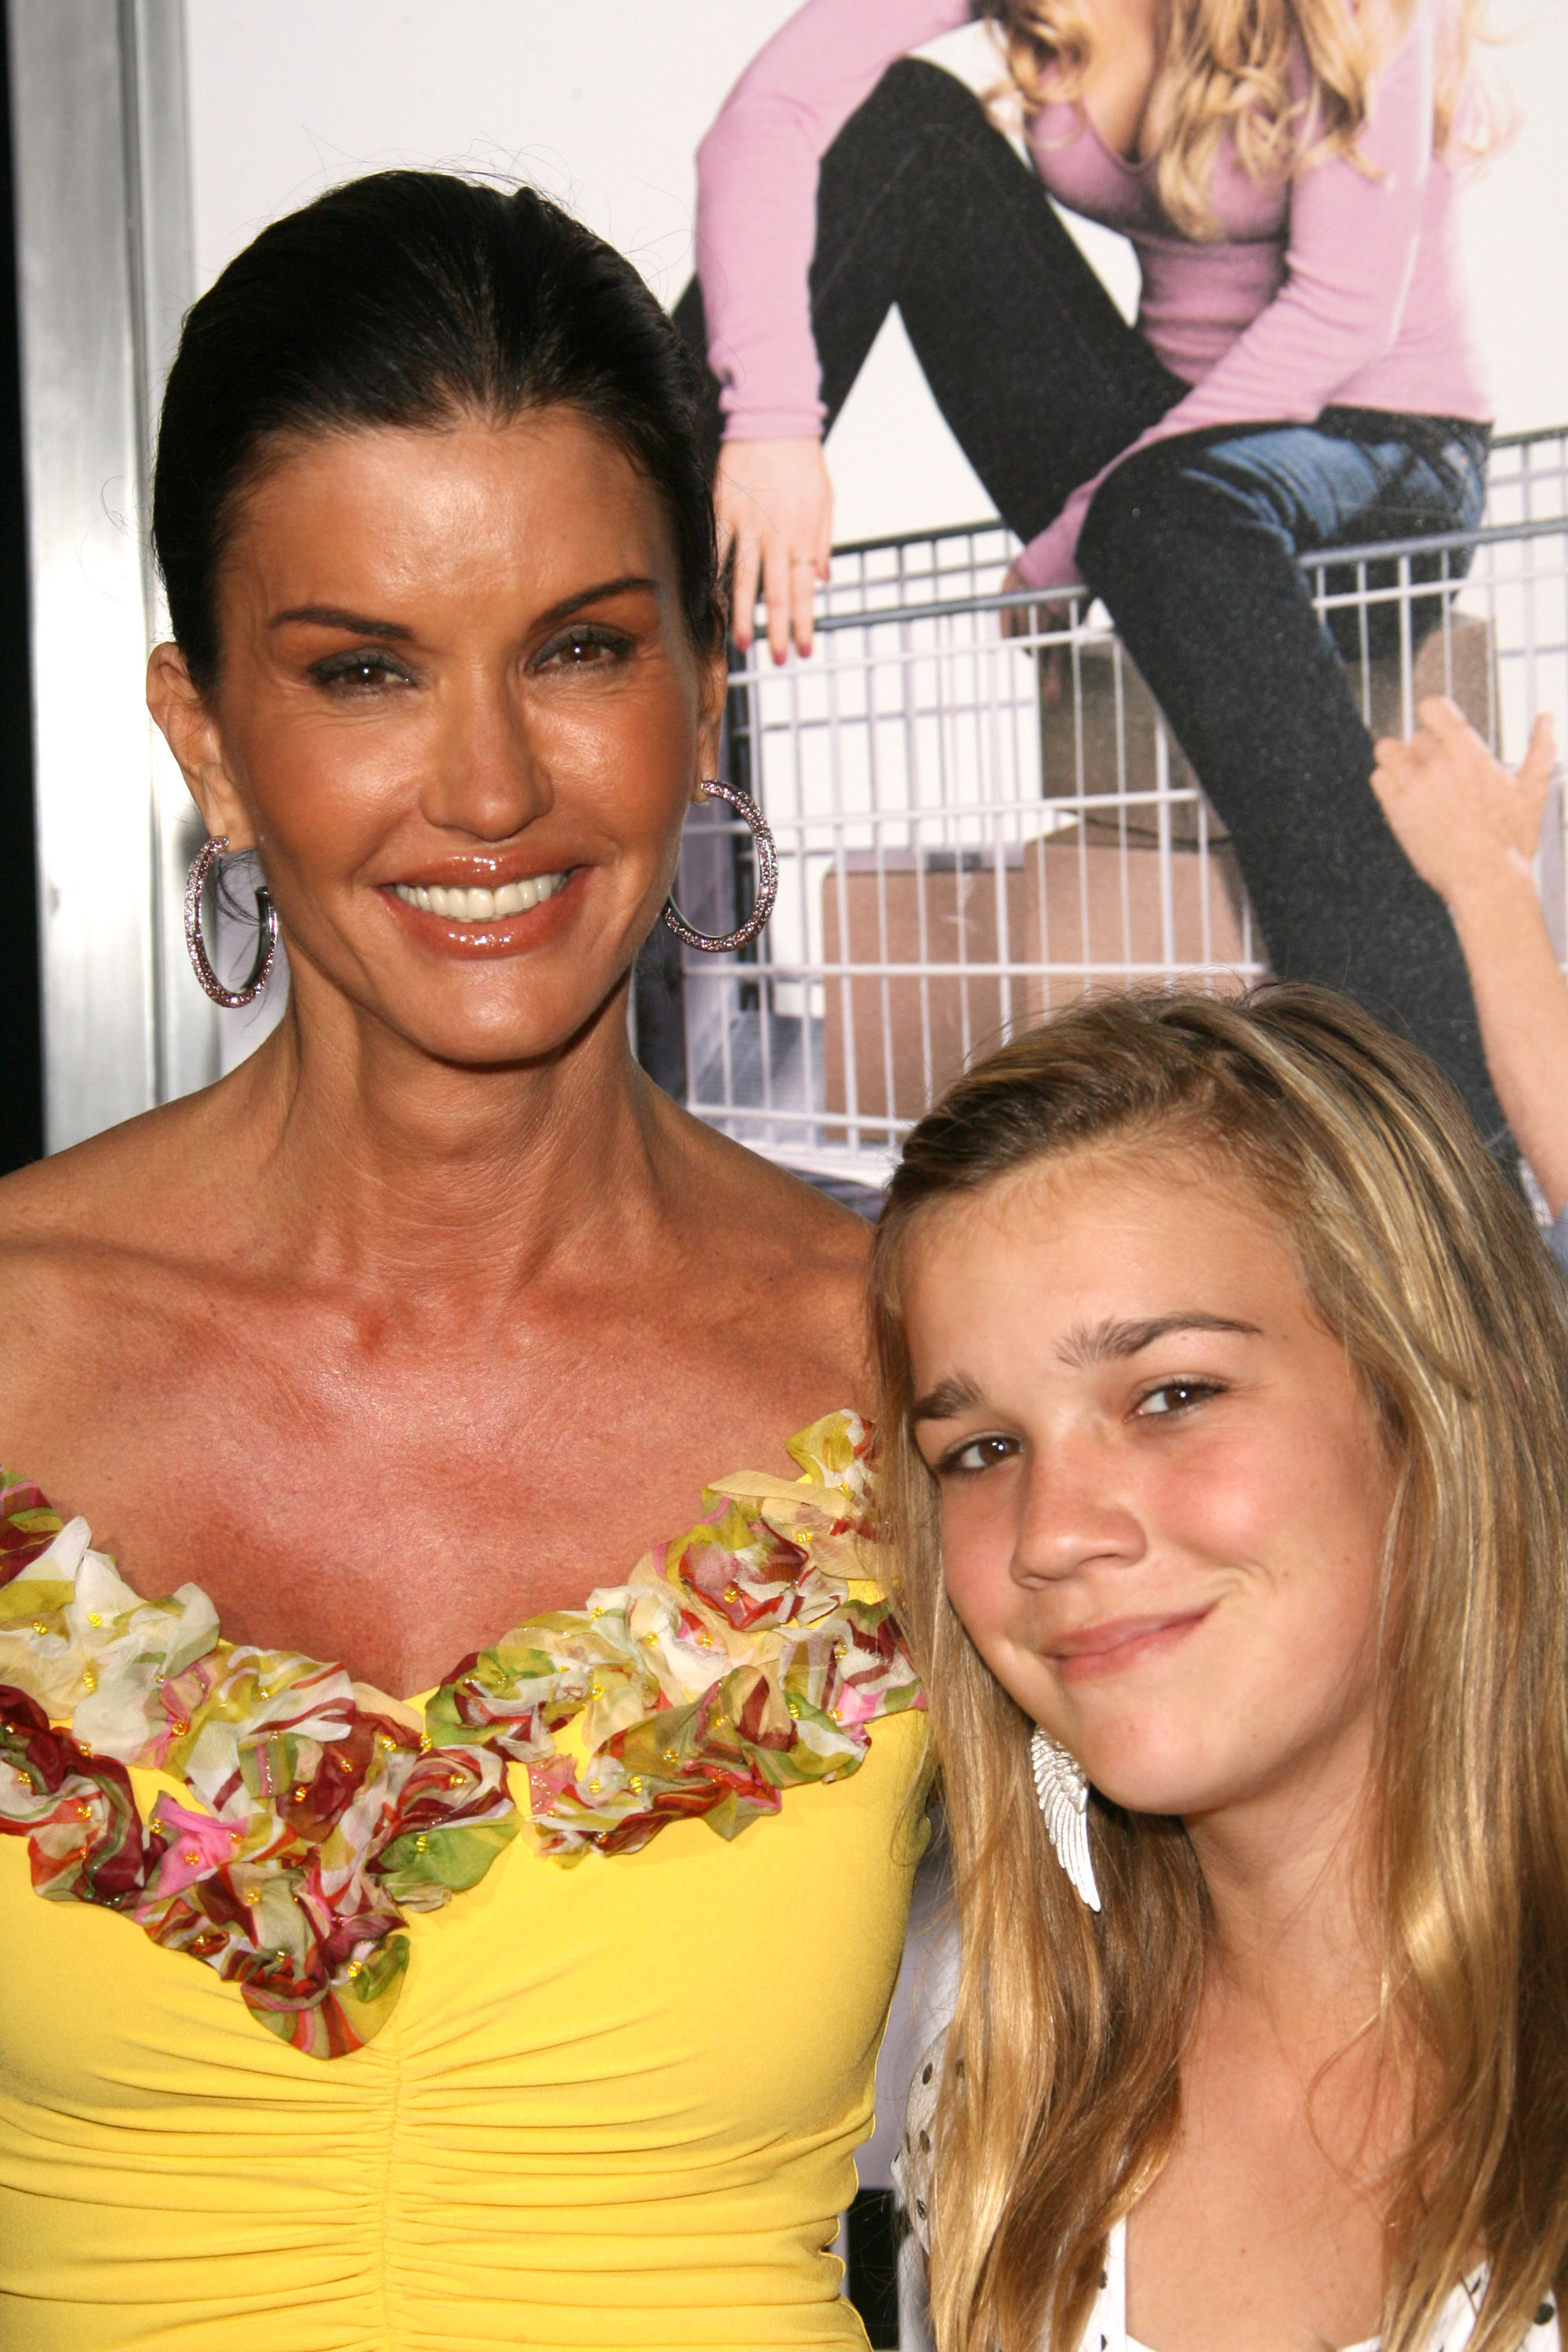 Janice Dickinson and her daughter Savannah in Los Angeles, California in 2006 Source: Getty Images